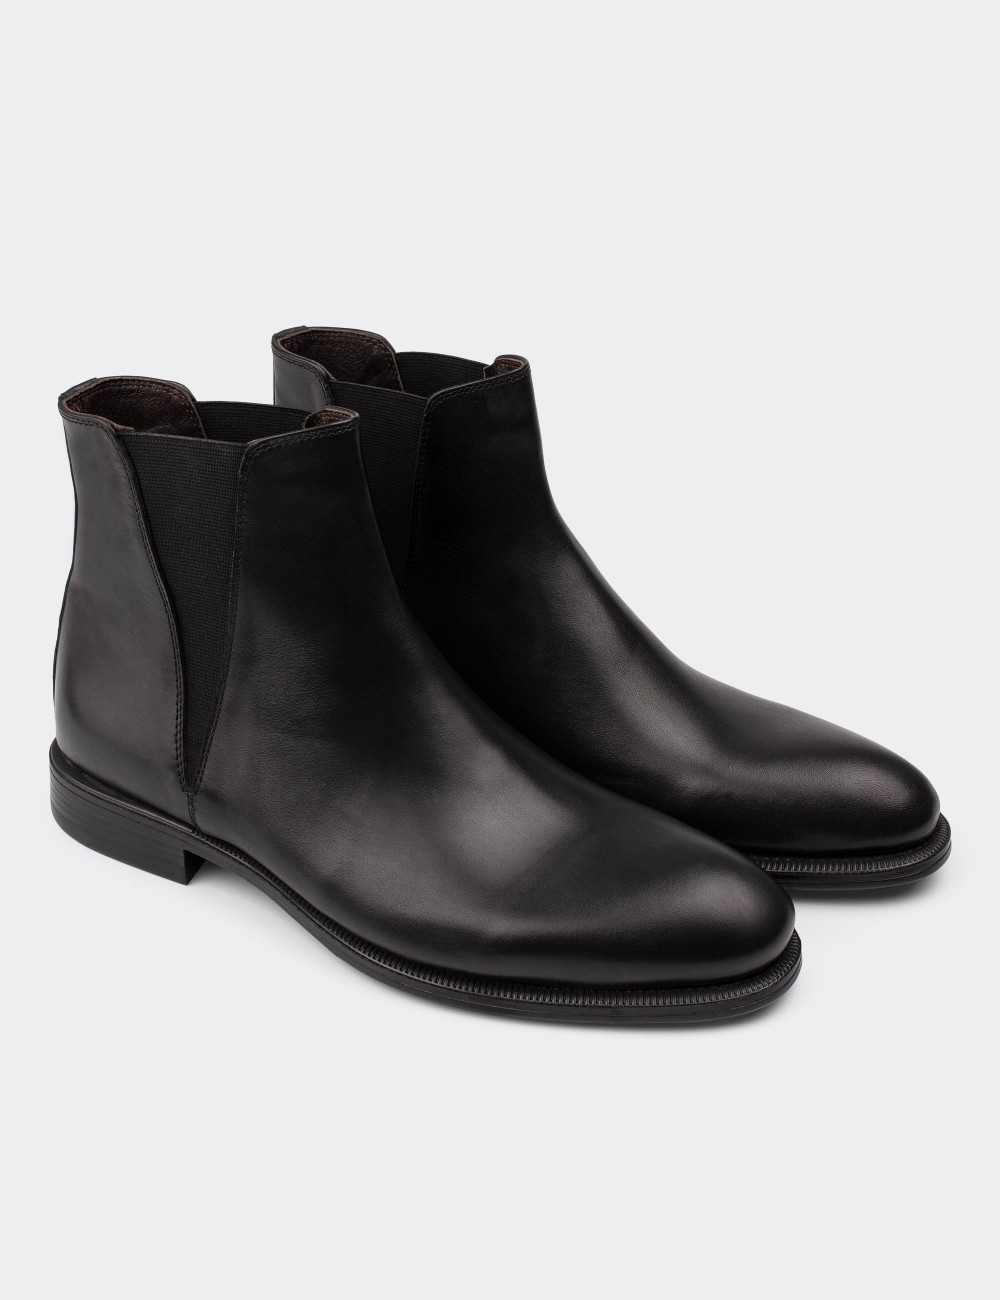 Black  Leather Chelsea Boots - 01689MSYHC01